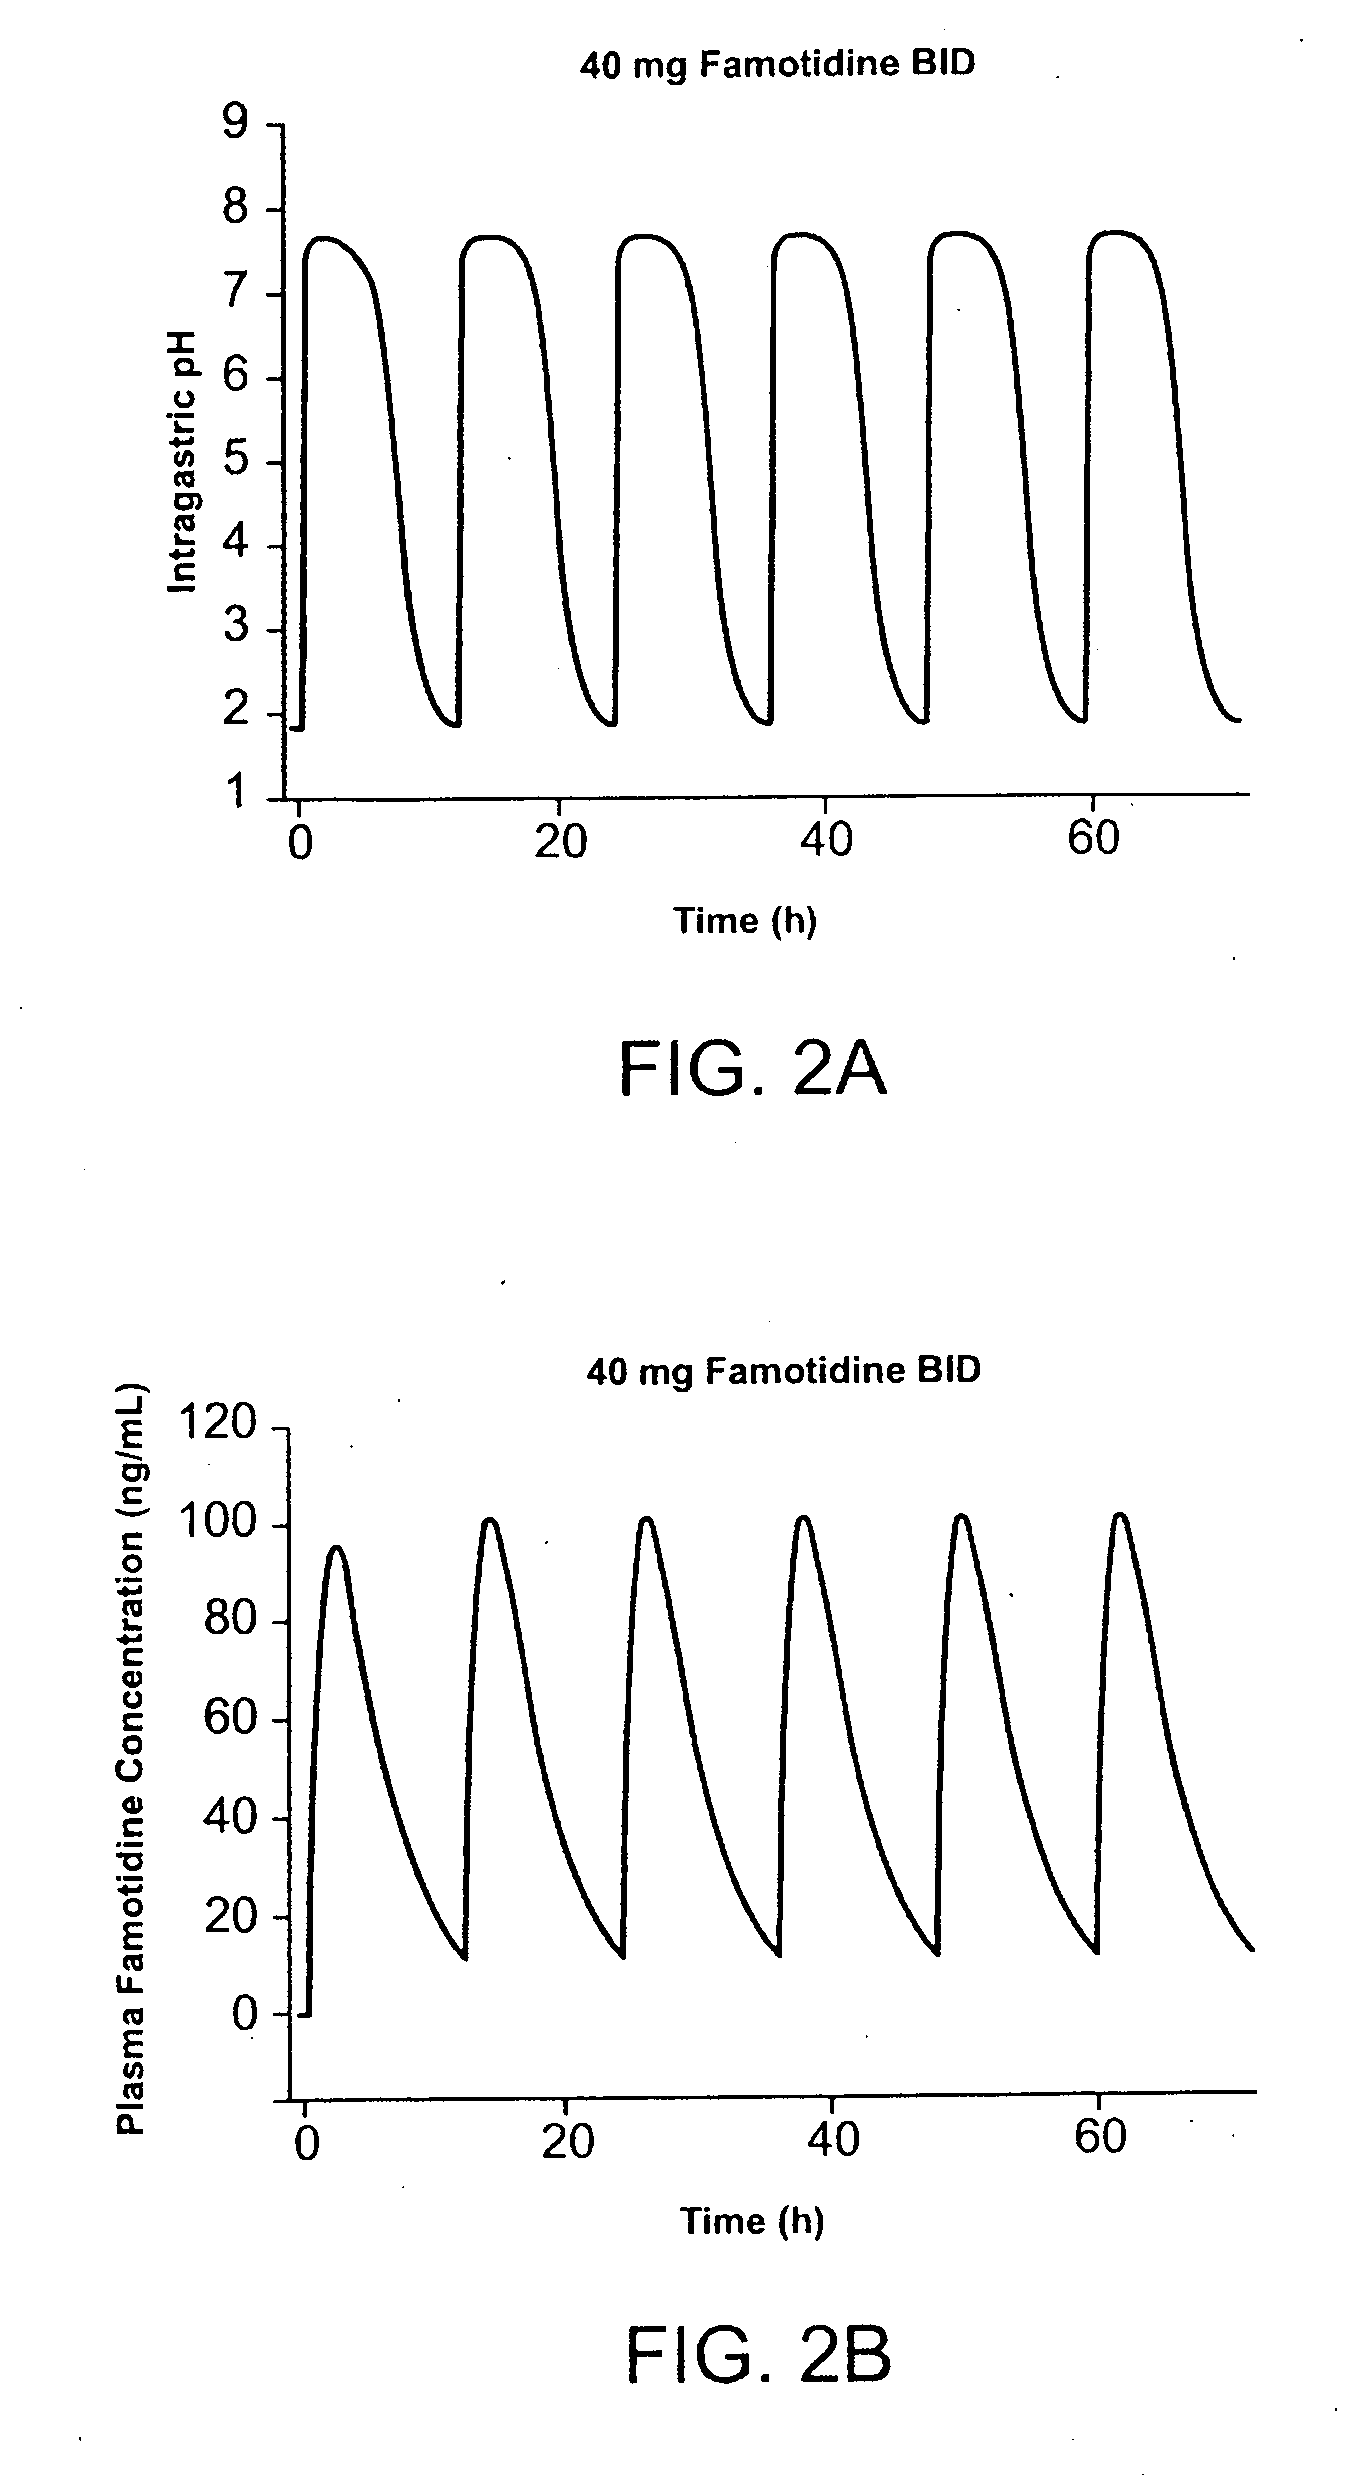 Medicaments containing famotidine and ibuprofen and administration of same